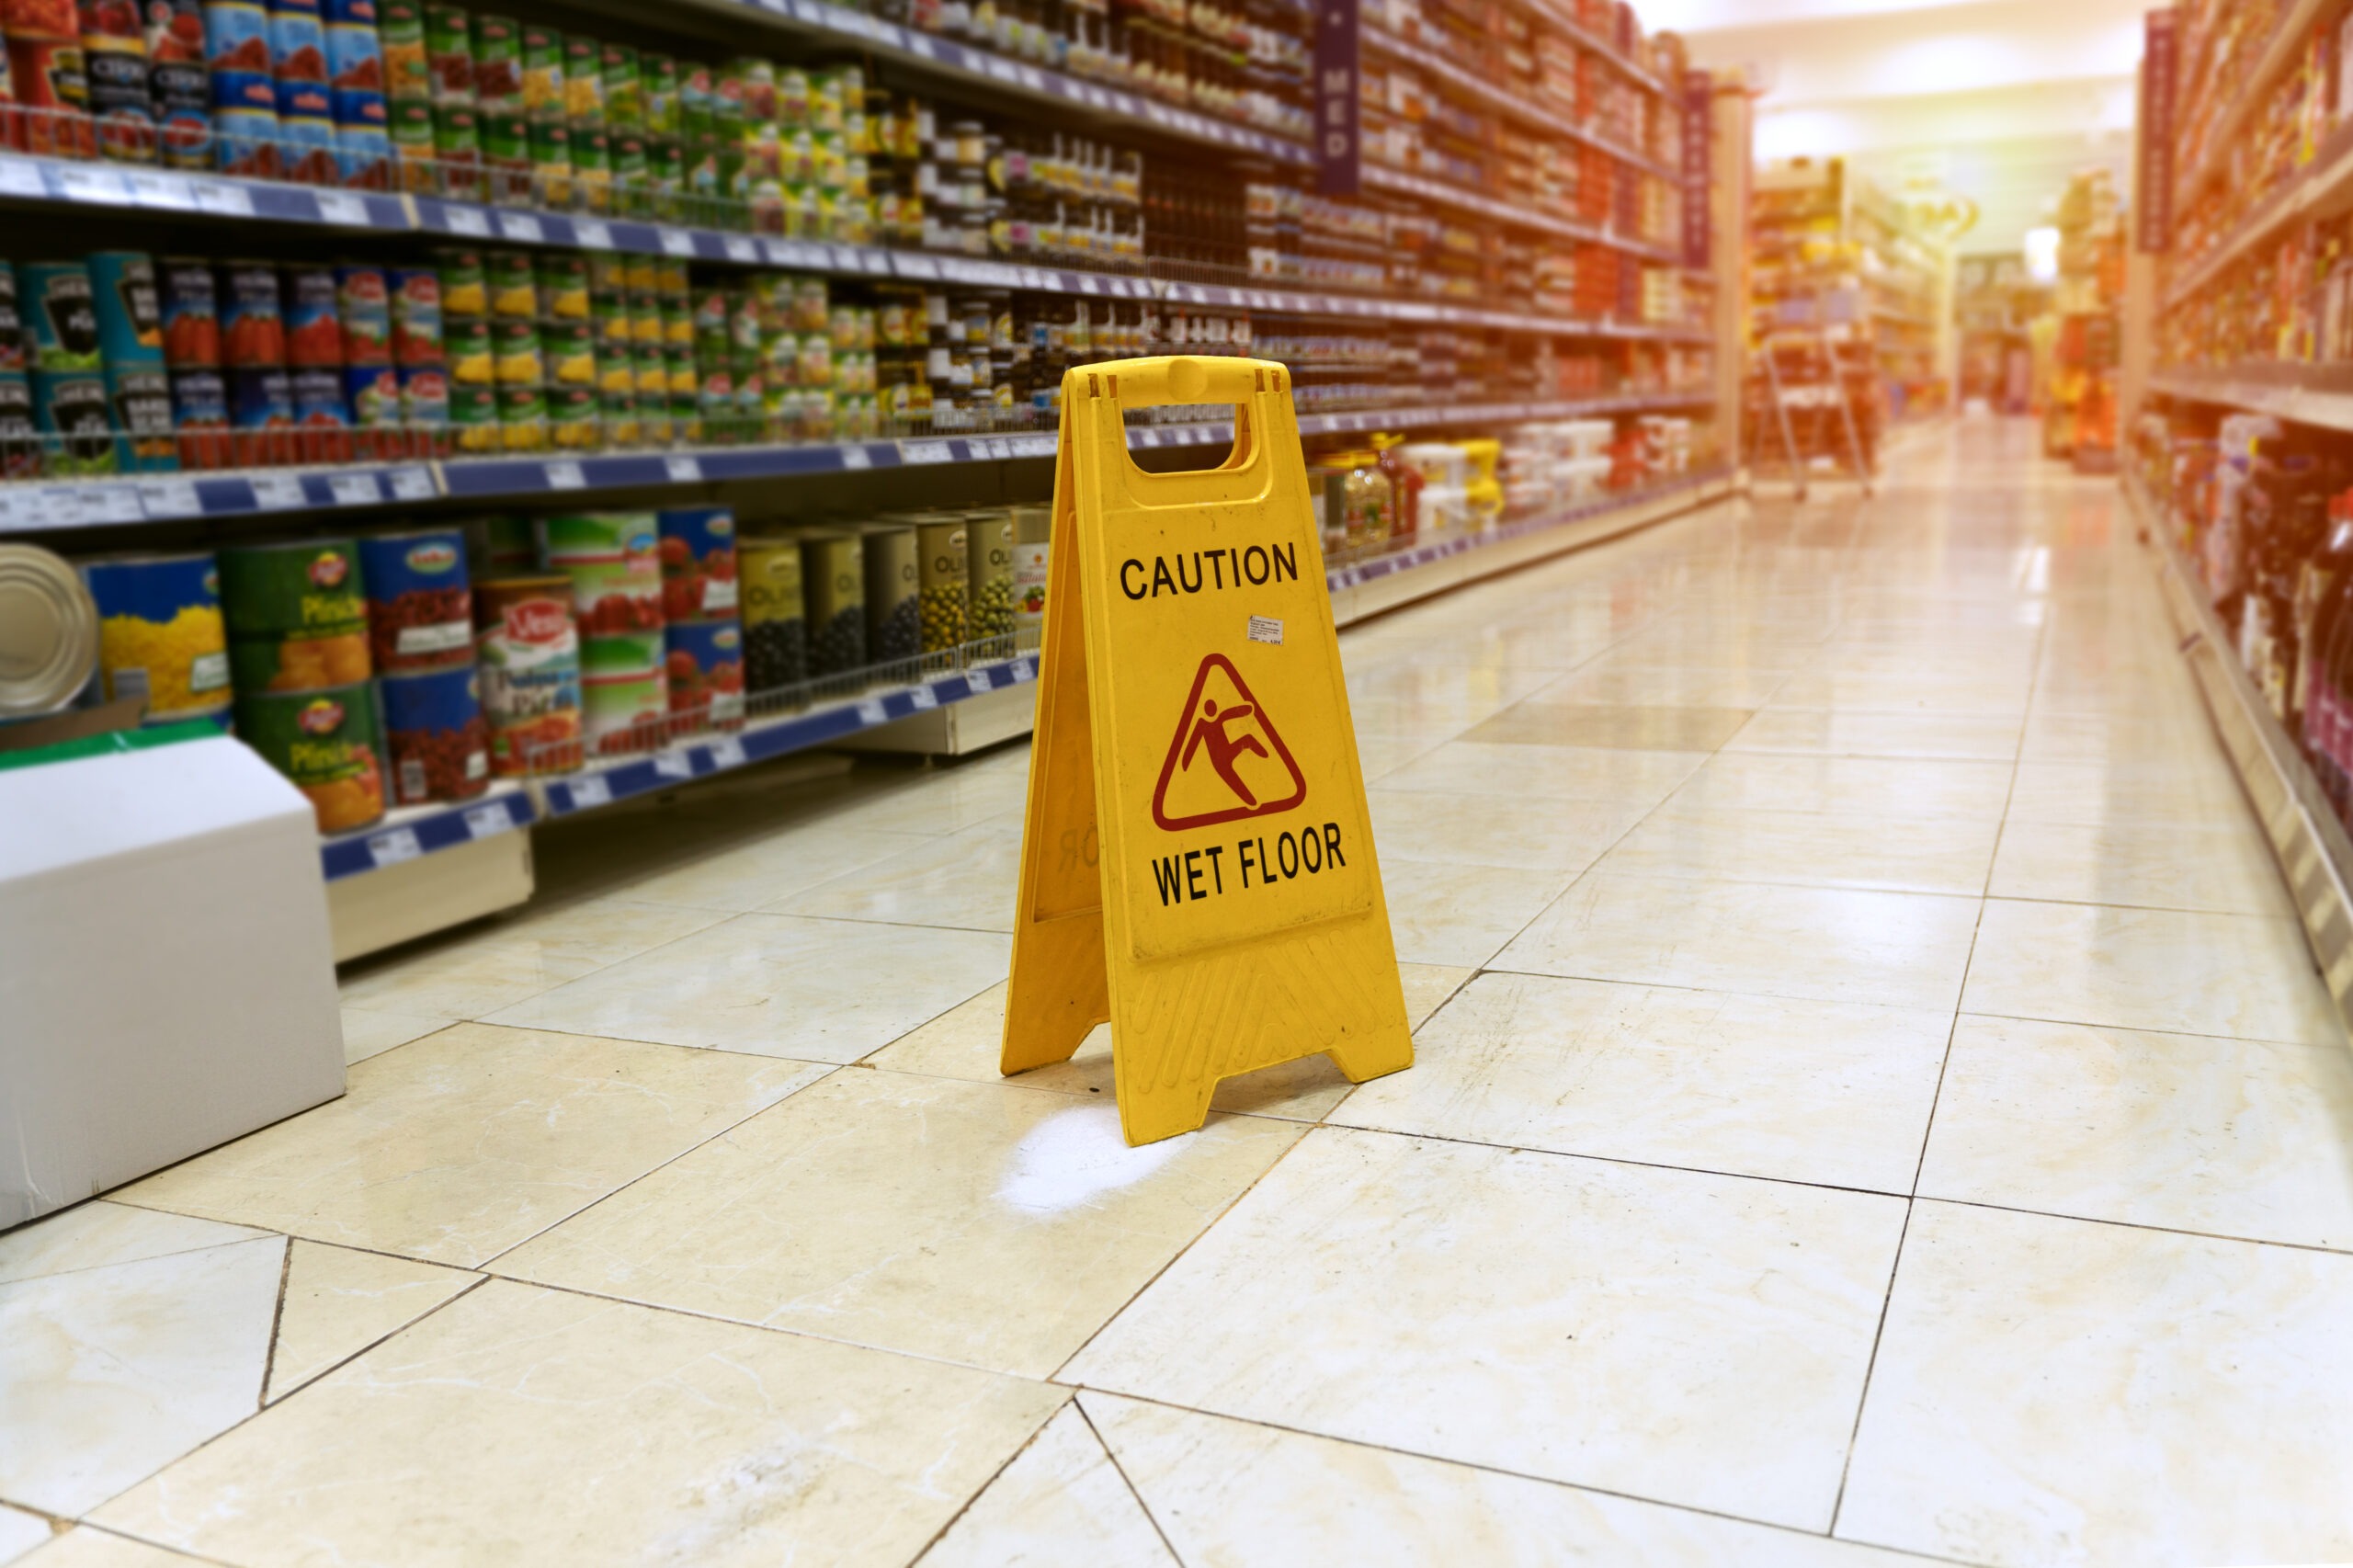 What to Do If You're Injured in a Department Store?